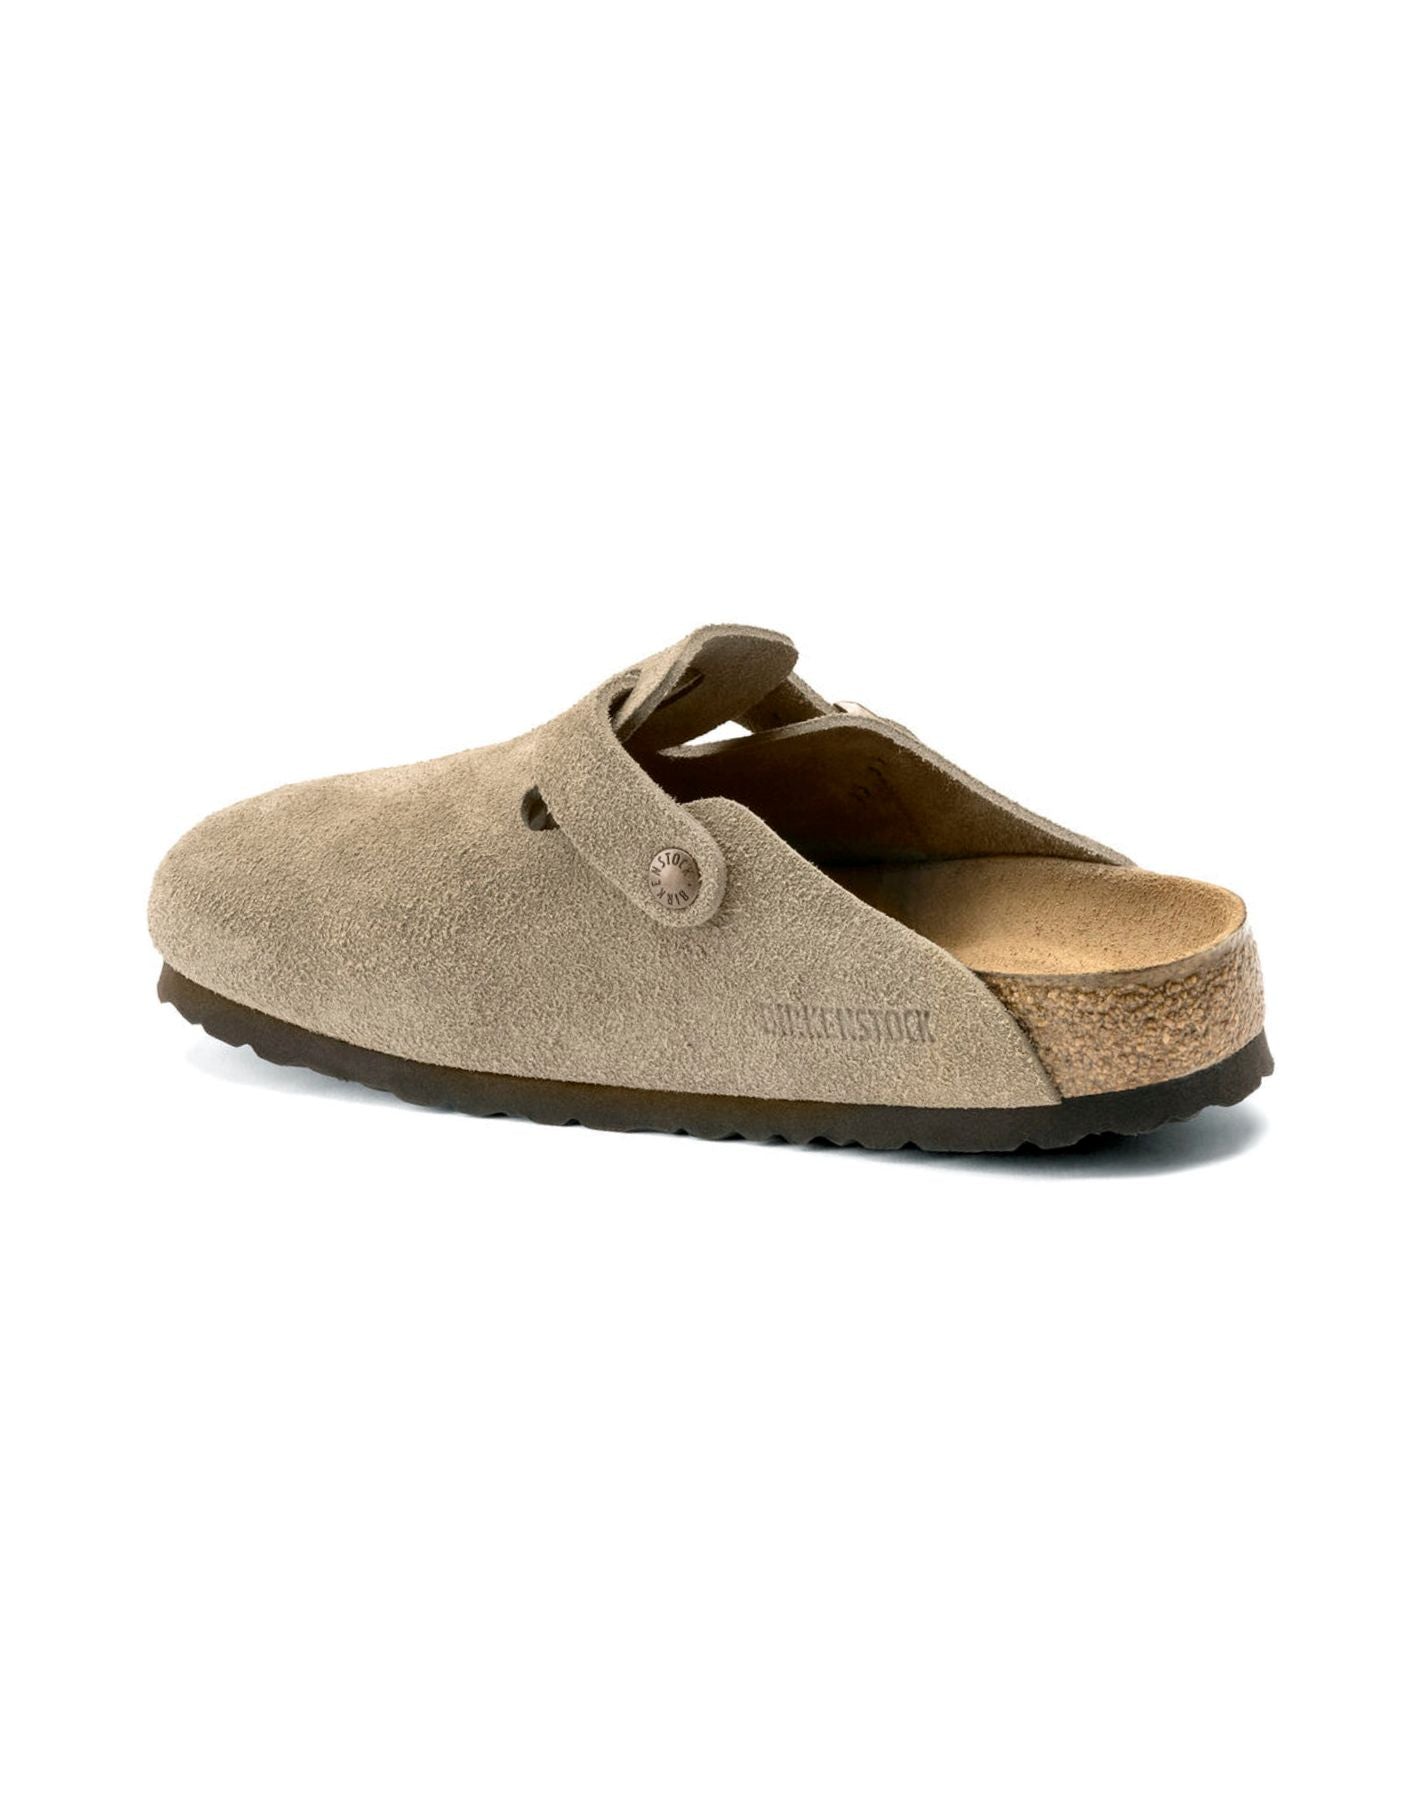 Shoes for woman 0560773 W TAUPE BOSTON BIRKENSTOCK